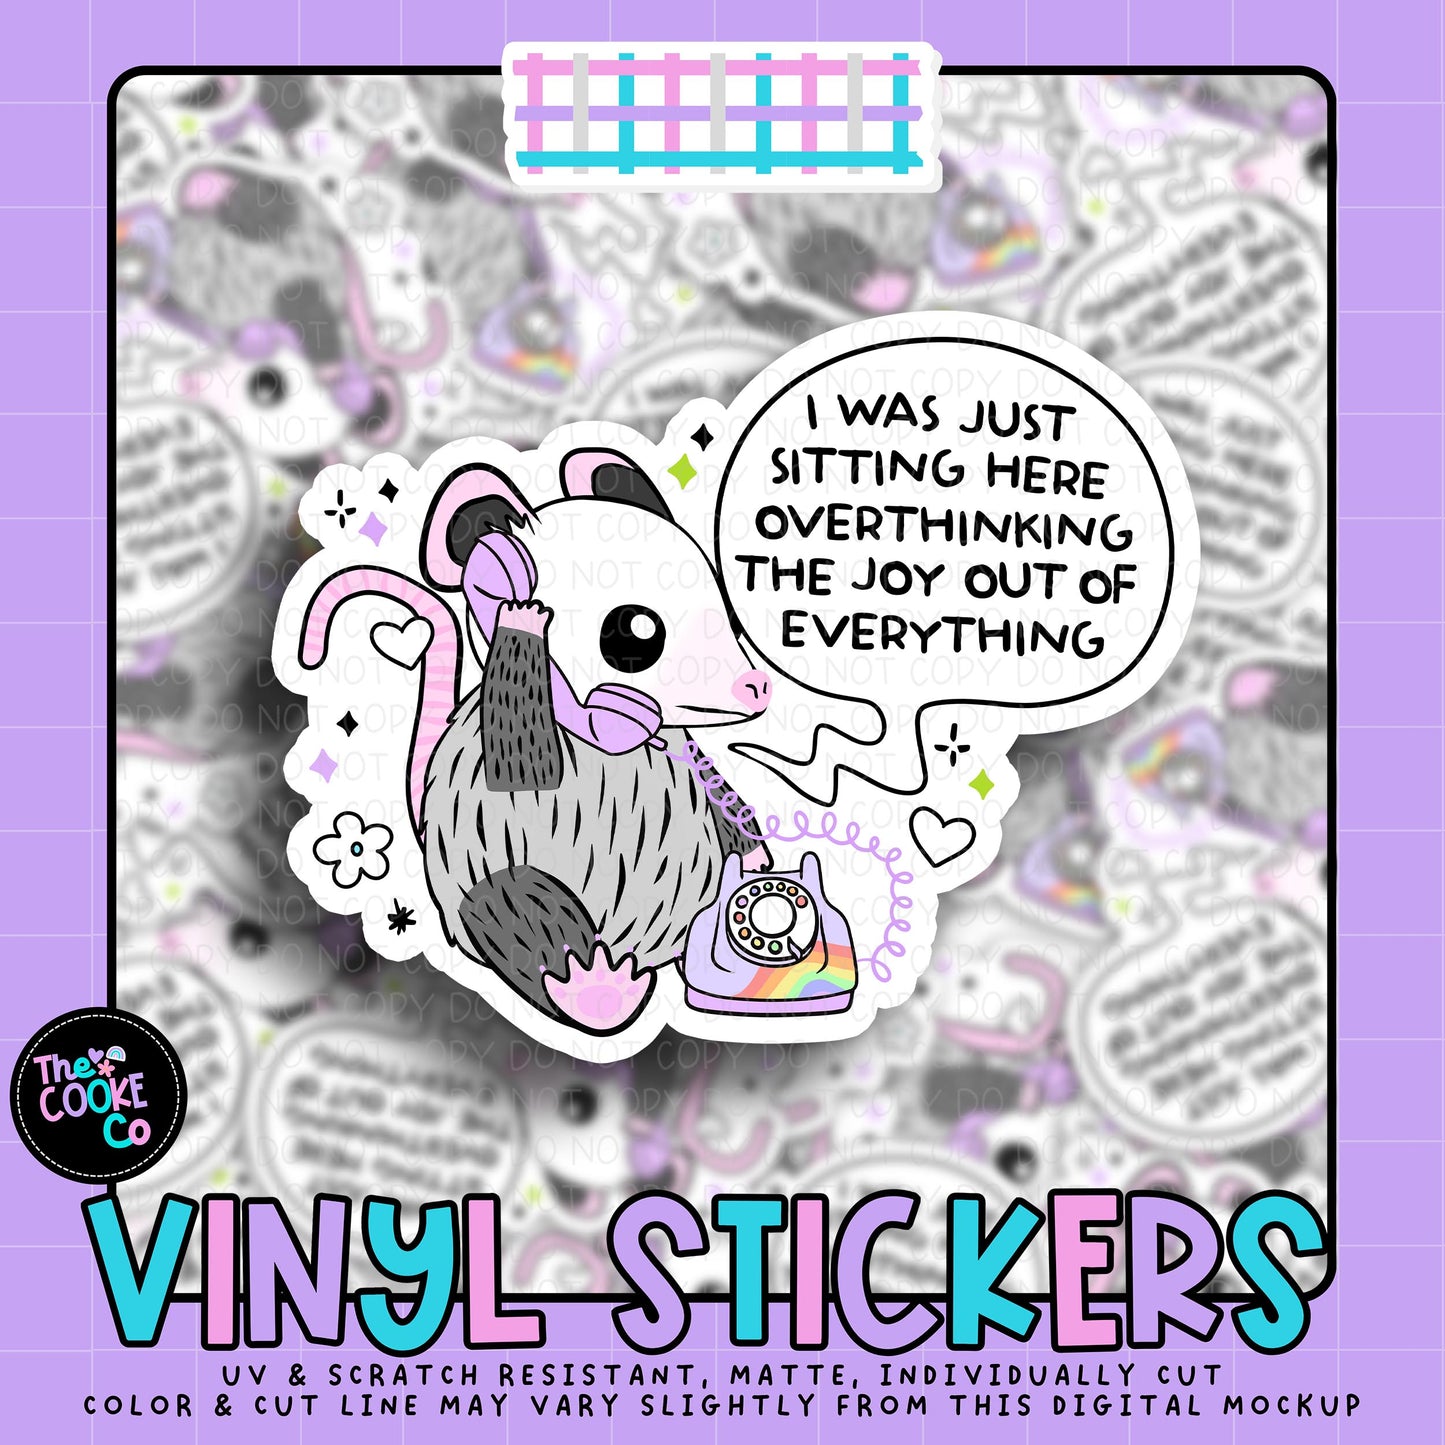 Vinyl Sticker | #V2123 - I WAS JUST SITTING HERE OVERTHINKING THE JOY OUT OF EVERYTHING